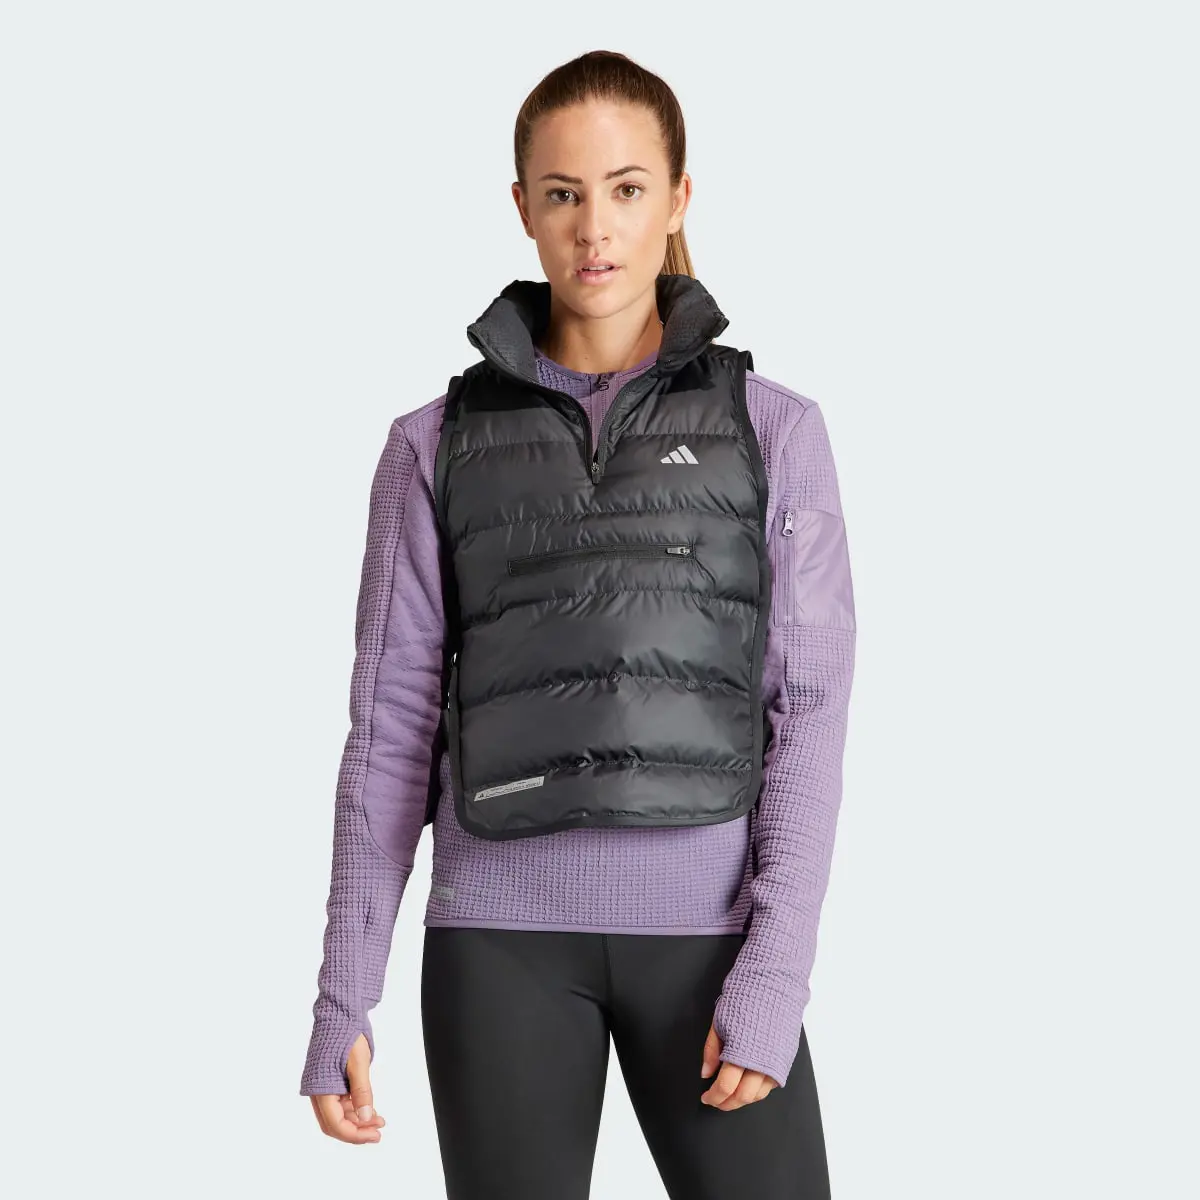 Adidas Ultimate Running Conquer the Elements Body Warmer Vest. 2